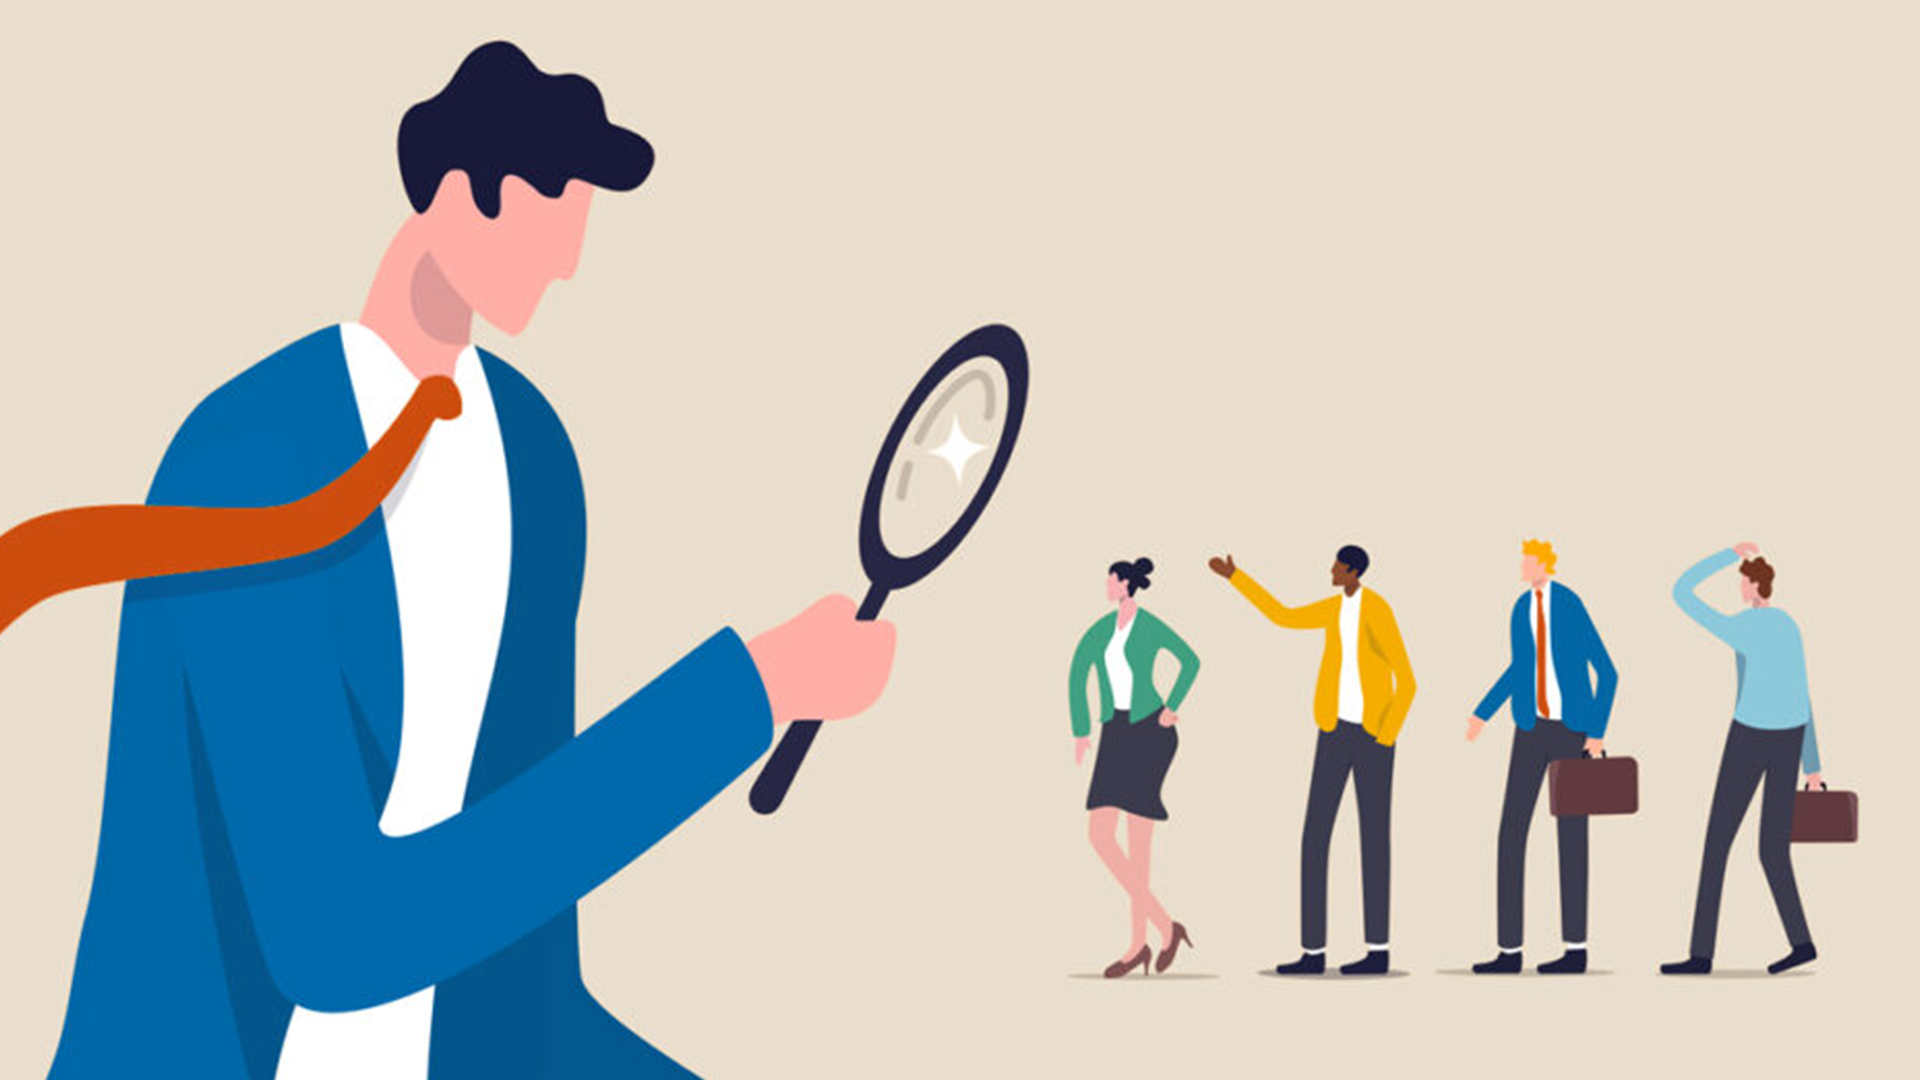 Illustration of man inspecting different candidates through magnifying glass